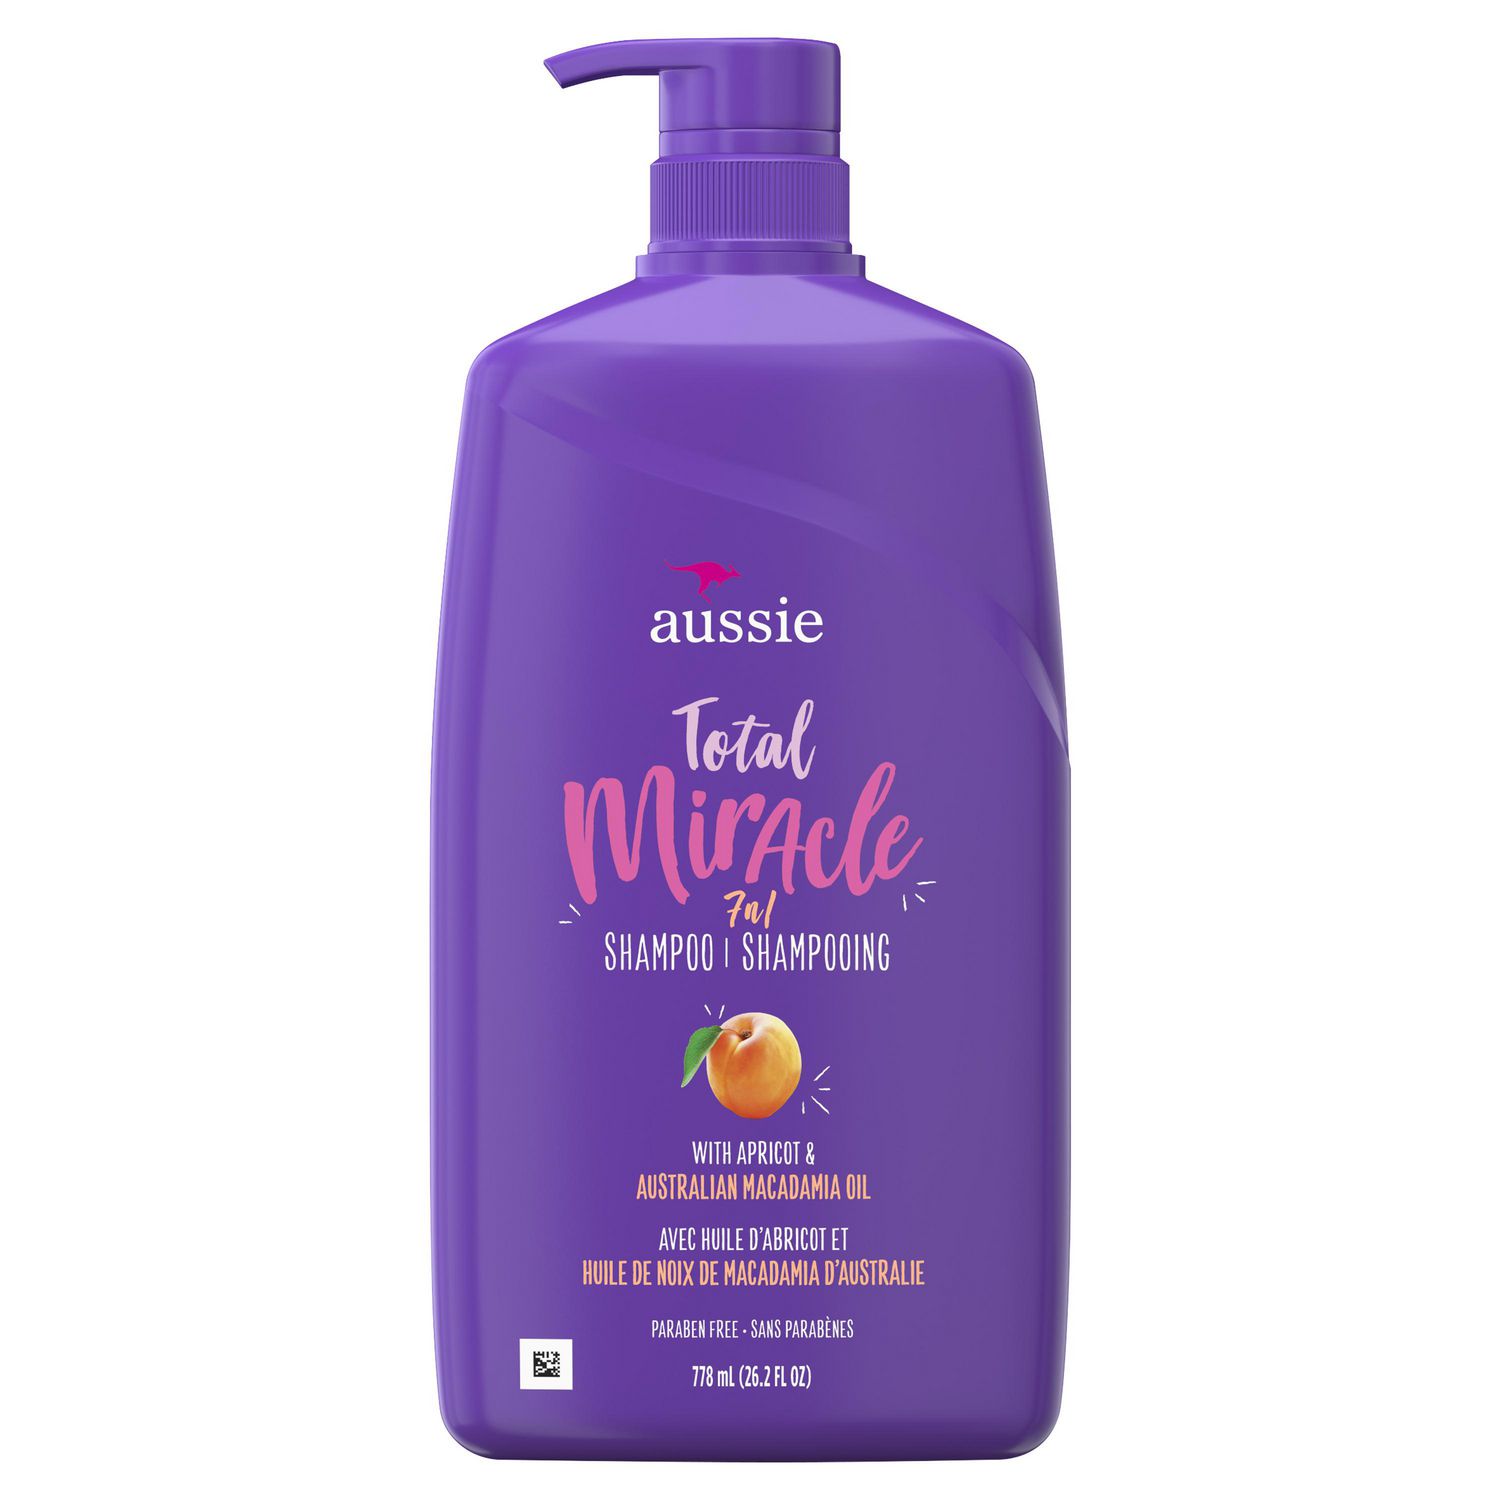 Aussie Total Miracle with Apricot & Macadamia Oil, Paraben Free Shampoo